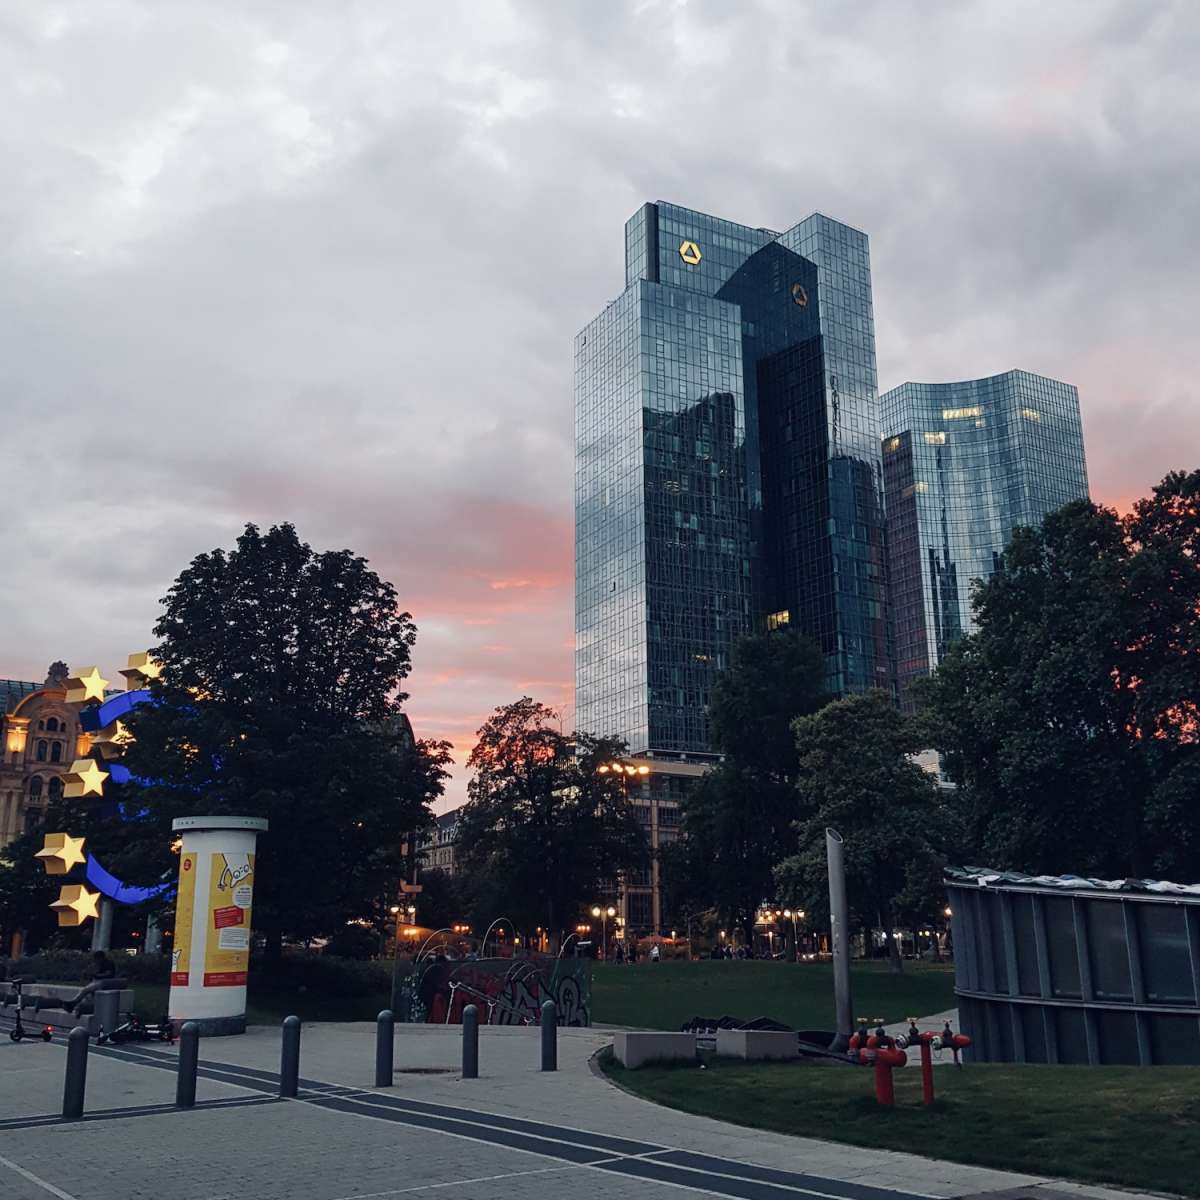 Twilight view of gay Frankfurt's skyline featuring the twin-towered Commerzbank headquarters, accented by an artistic star-shaped street installation.